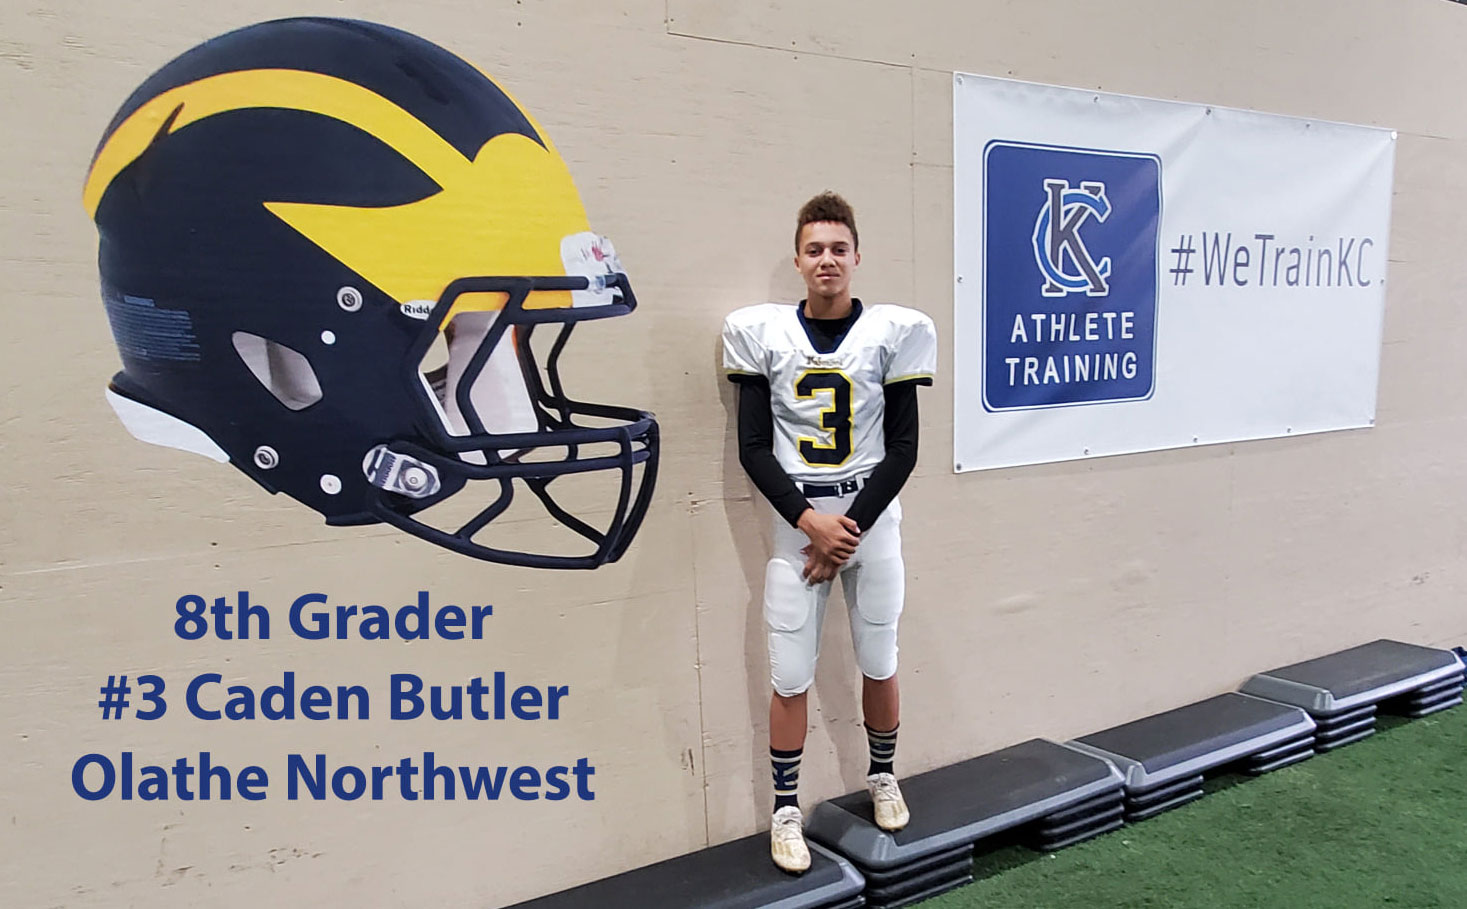 Class of 2025 of Olathe Northwest High School Caden Butler former player for the Missouri Wolverines Youth Football Club in Kansas City Missouri